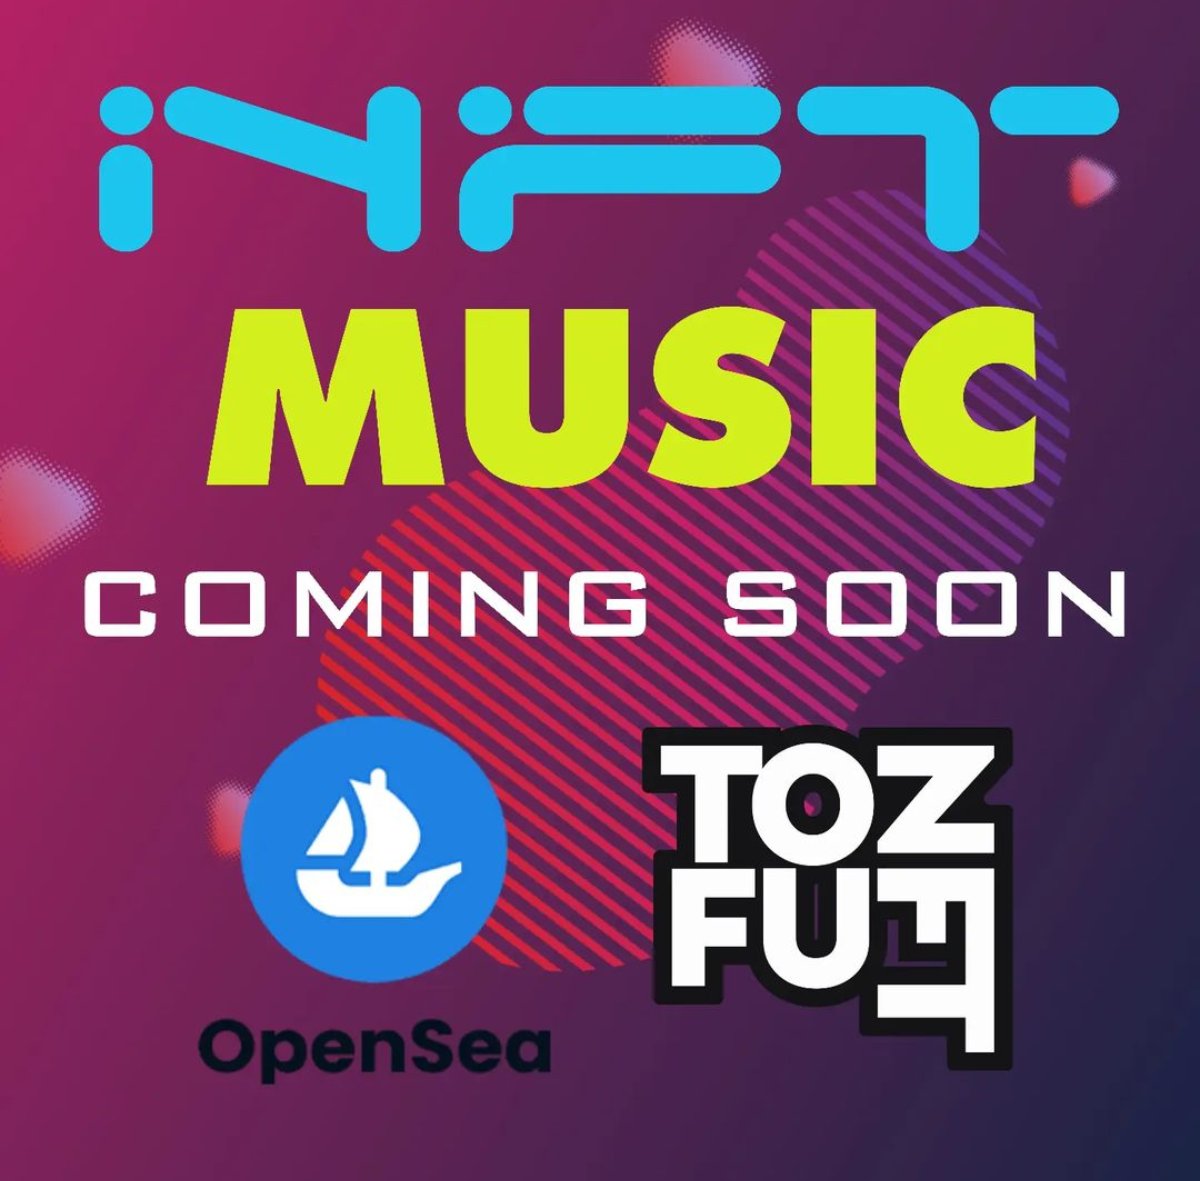 TEHRANCE, NFT Music is Coming Soon 🕺 Available on OpenSea or TOFUNFT after release 🥳 #tehrancemusic #tehrance #trance #cryptocurrency #nft_music #nftmusic #nft #music #electronic_music #spotify #applemusic #opensea #tofu_nft #youtubemusic #tofunft #soundcloud #open_sea